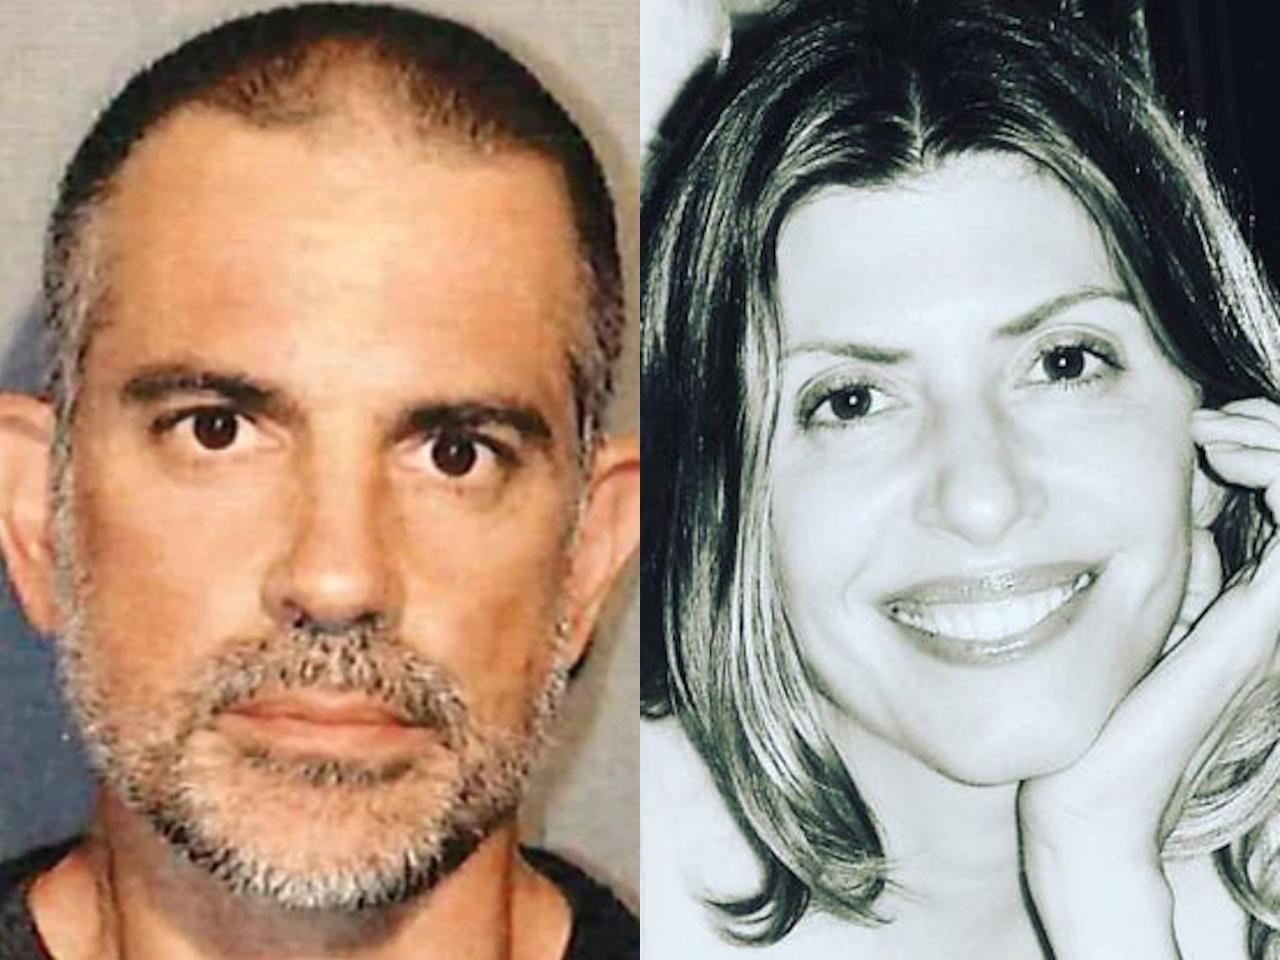 Fotis Dulos Arrested After Wife's DNA Found In Vehicle | Missing | Investigation Discovery